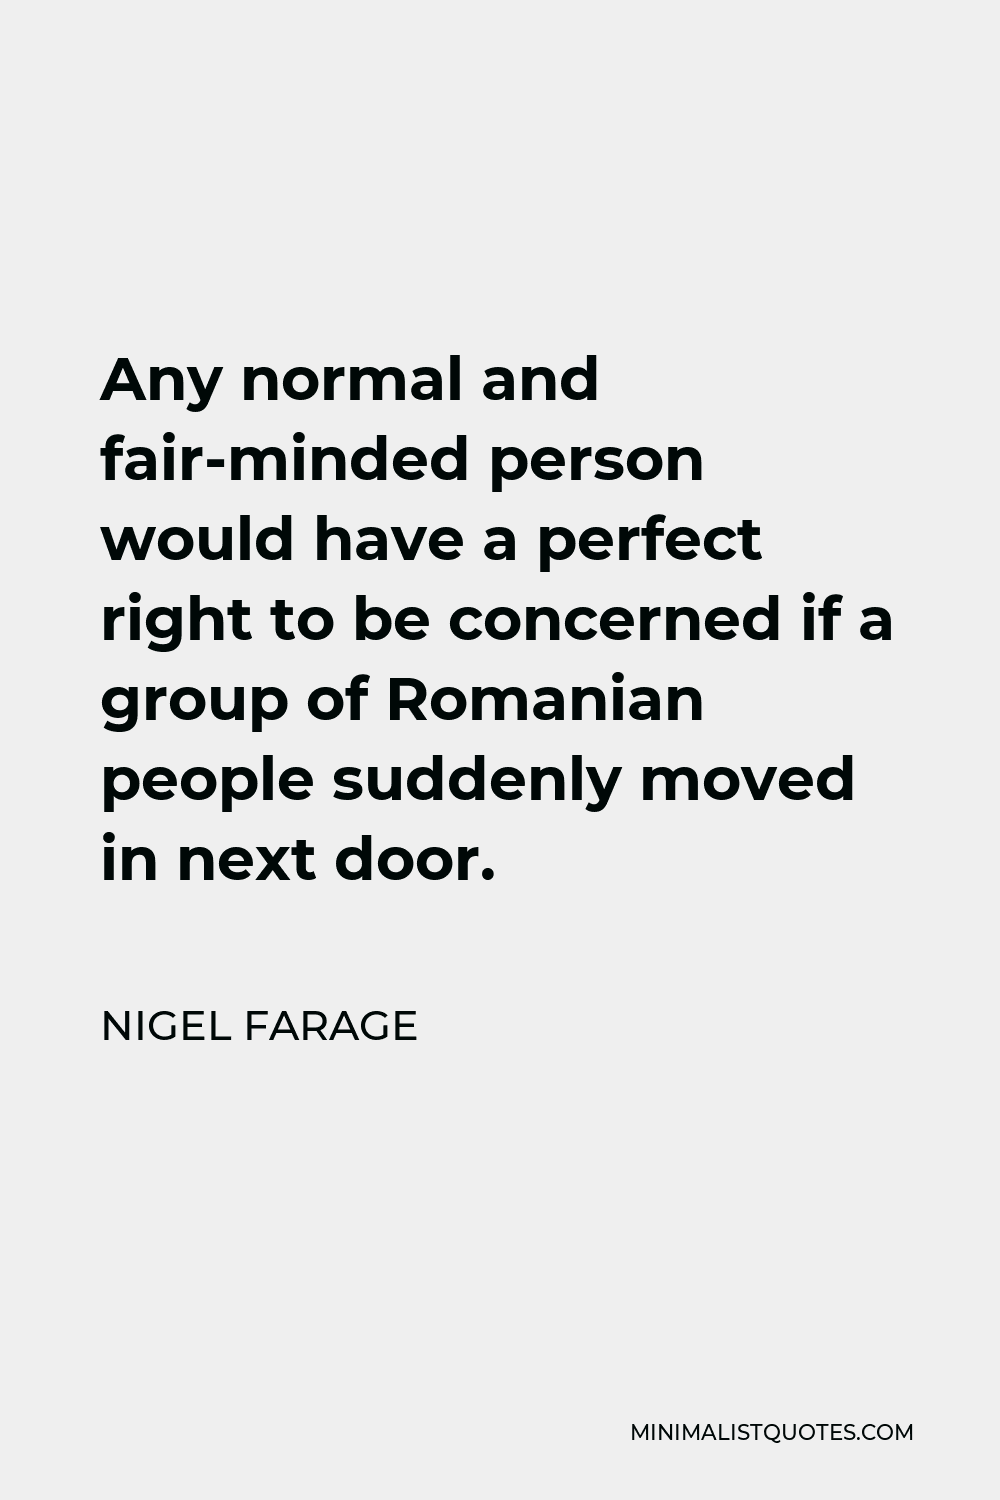 Nigel Farage Quote - Any normal and fair-minded person would have a perfect right to be concerned if a group of Romanian people suddenly moved in next door.